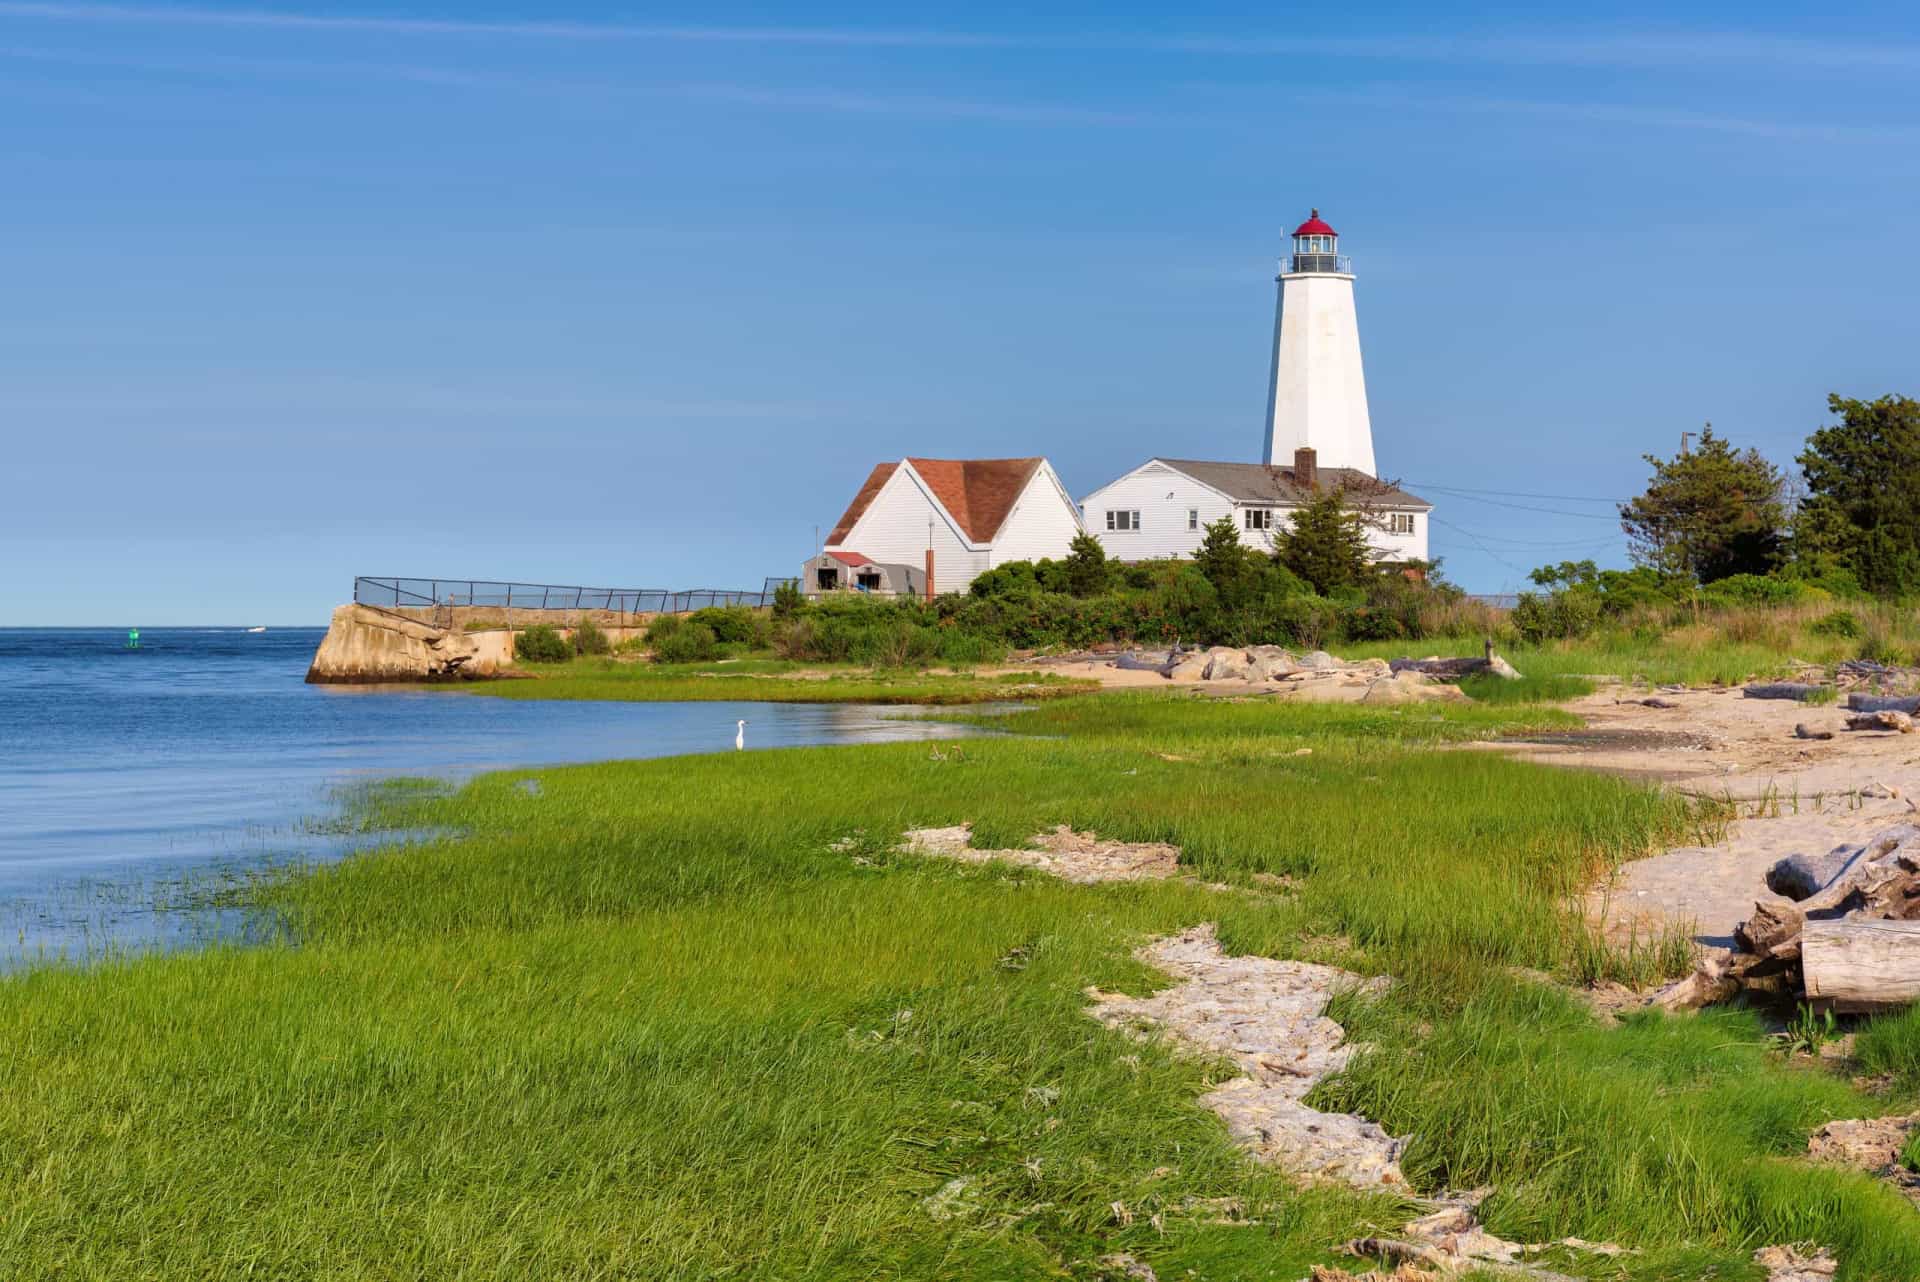 <p>A bracing walk along the beachfront at Old Saybrook brings you to Lynde Point Lighthouse, which has been in operation since 1803.</p><p>Sources: (<a href="https://www.nps.gov/nebe/learn/historyculture/charleswmorgan.htm" rel="noopener">National Park Service</a>) (<a href="https://www.britannica.com/biography/William-Hooker-Gillette" rel="noopener">Biography</a>) (<a href="https://www.nytimes.com/1986/09/21/nyregion/two-ancient-inns-claim-to-be-the-oldest.html" rel="noopener">The New York Times</a>) (<a href="https://neam.org/pages/silas-brooks-balloon-basket" rel="noopener">New England Air Museum</a>)</p><p>See also: <a href="https://www.starsinsider.com/travel/137173/the-best-and-brightest-the-most-beautiful-and-iconic-lighthouses-in-america">The most beautiful and iconic lighthouses in America</a></p>